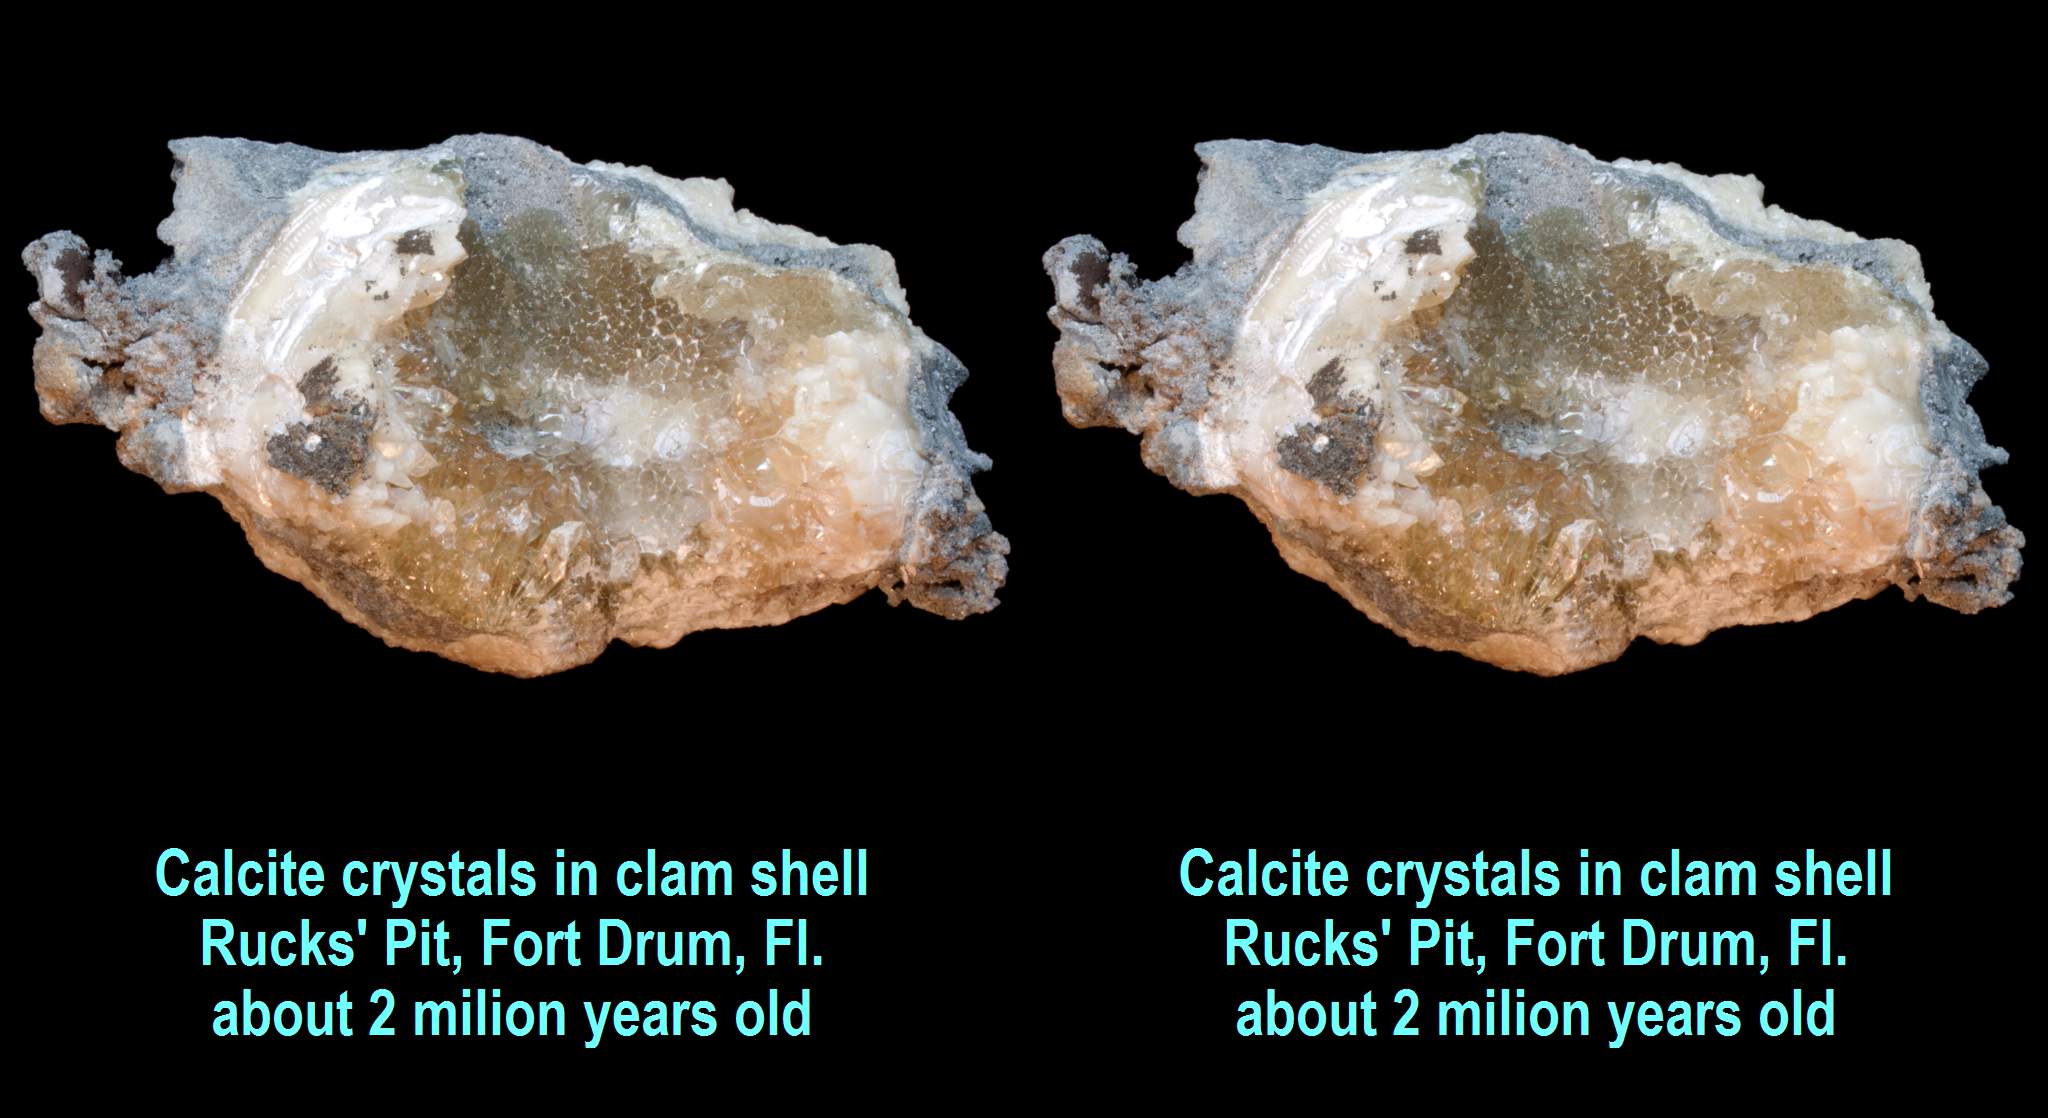 Calcite crystals in clam shell, Rucks' Pit, Fort Drum, Fl., about 2 milion years old